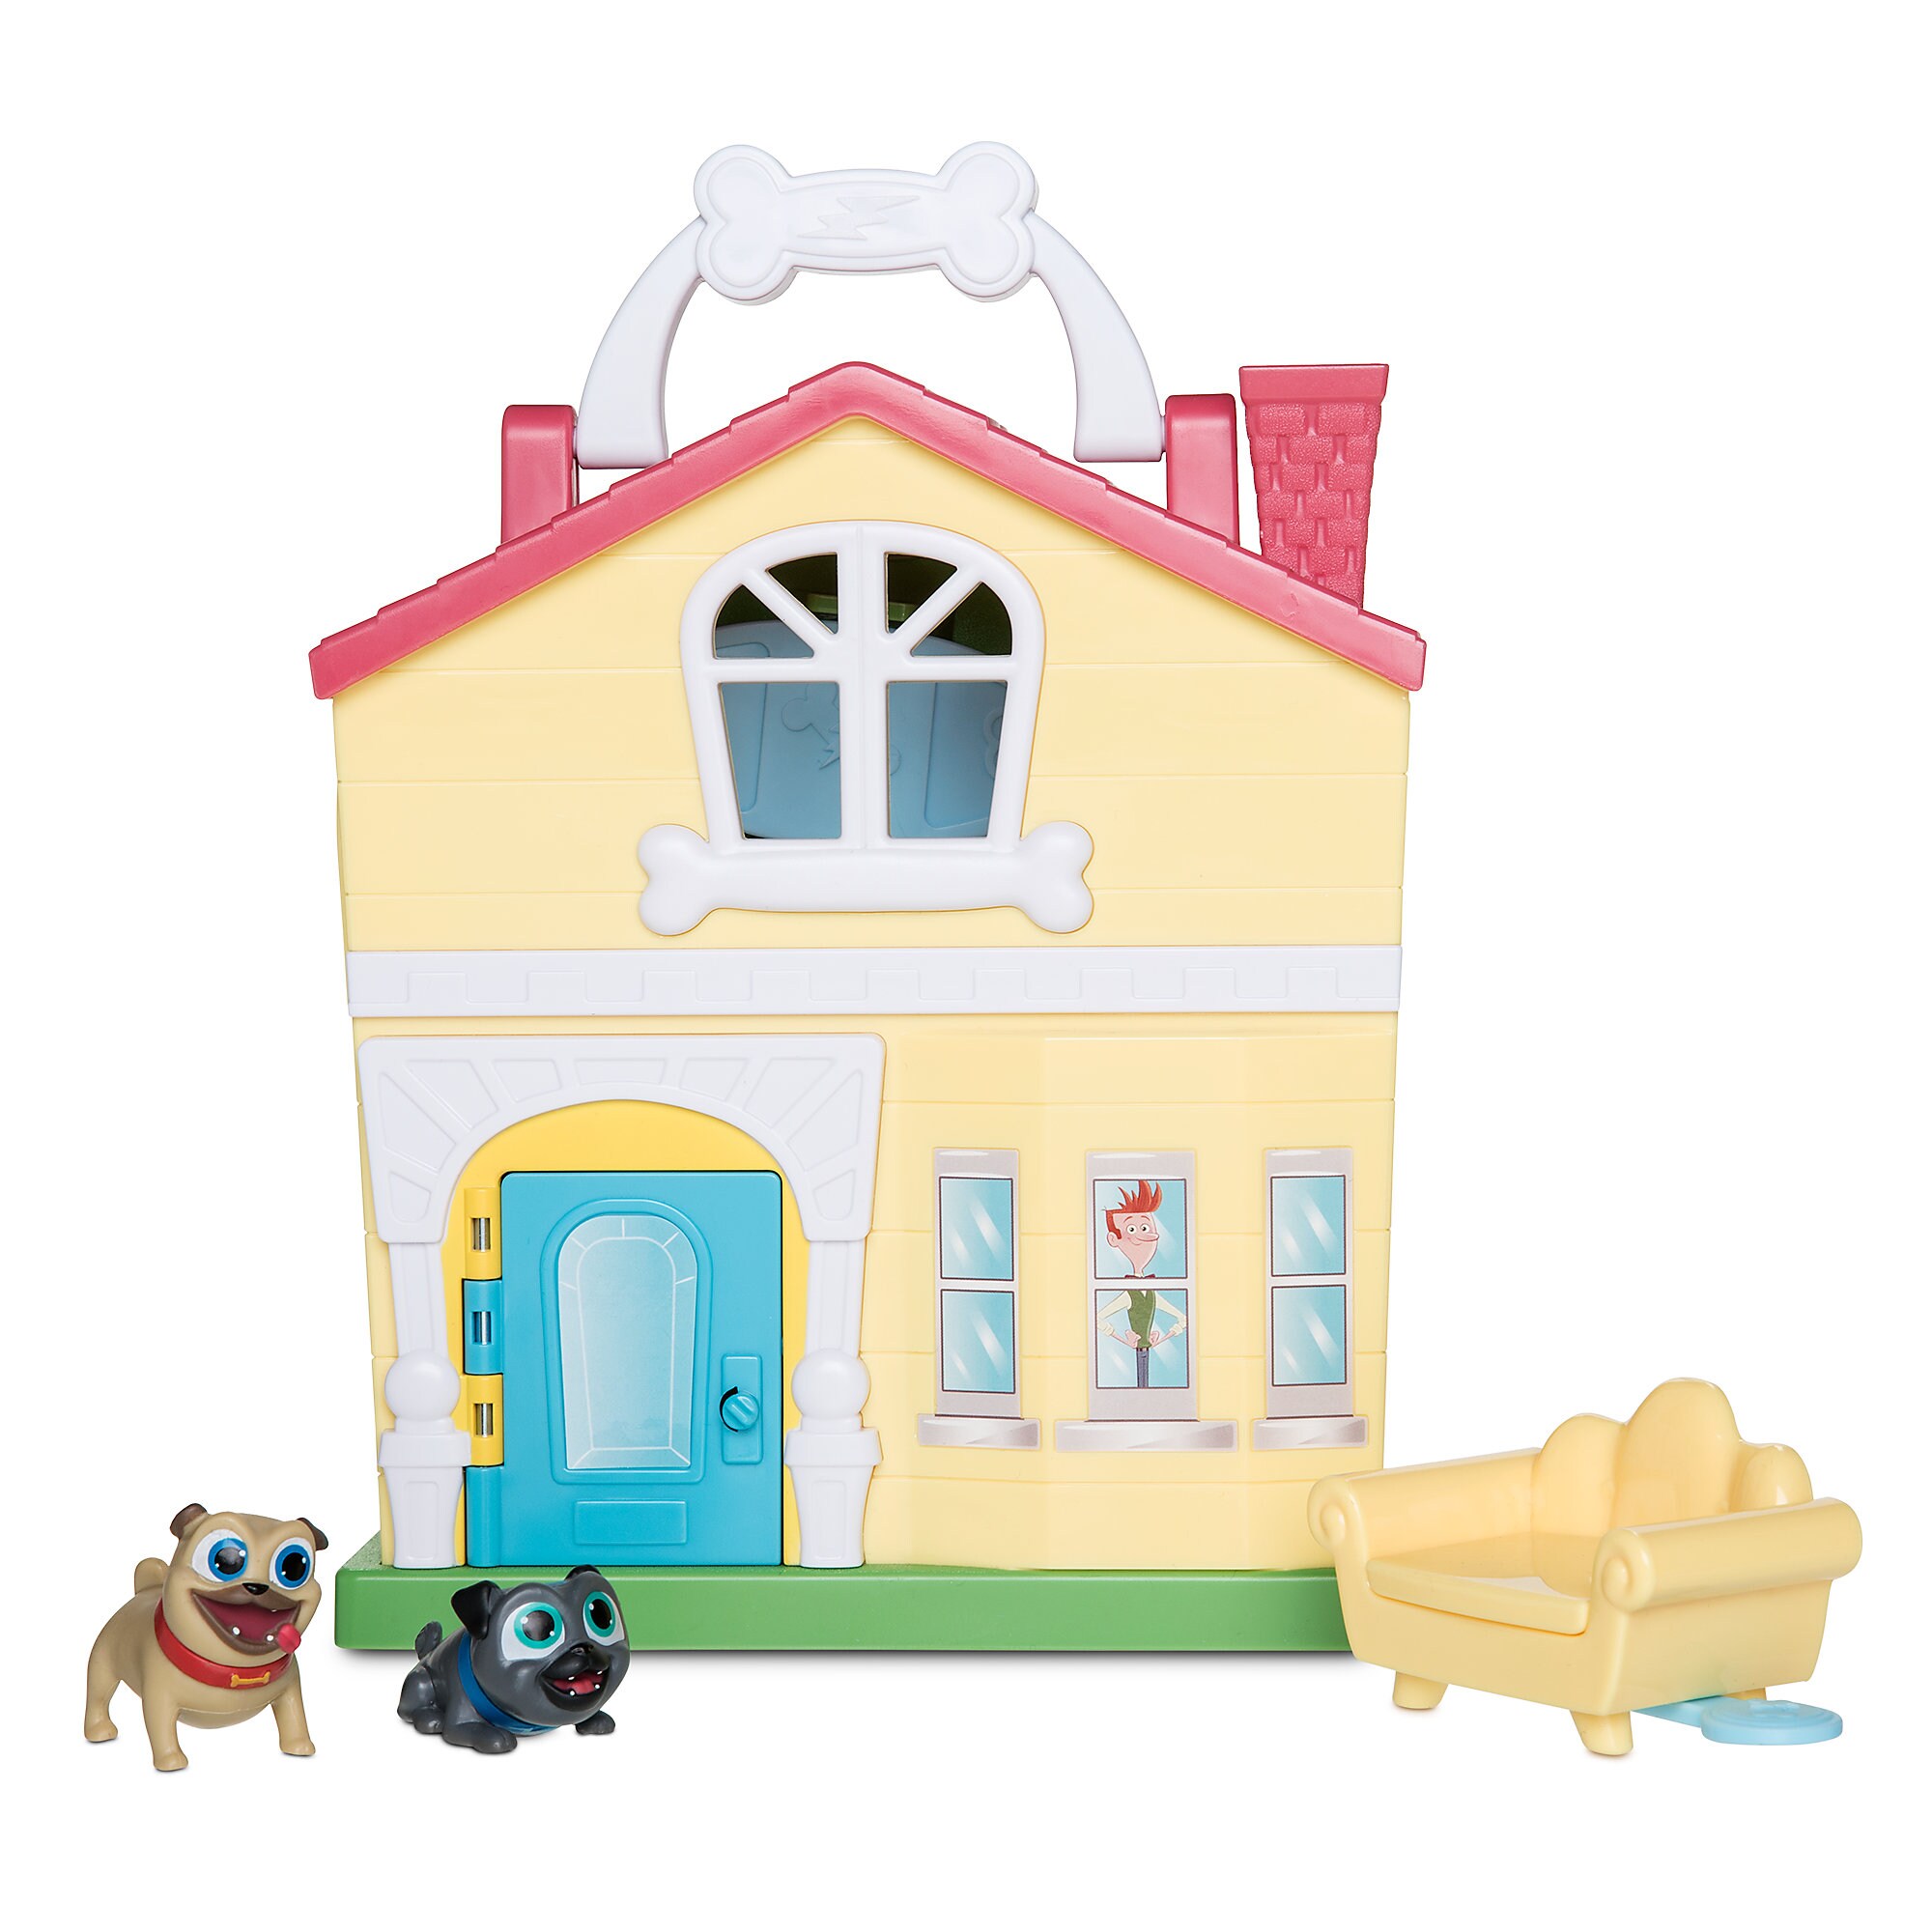 Puppy Dog Pals Stow N' Go Play Set